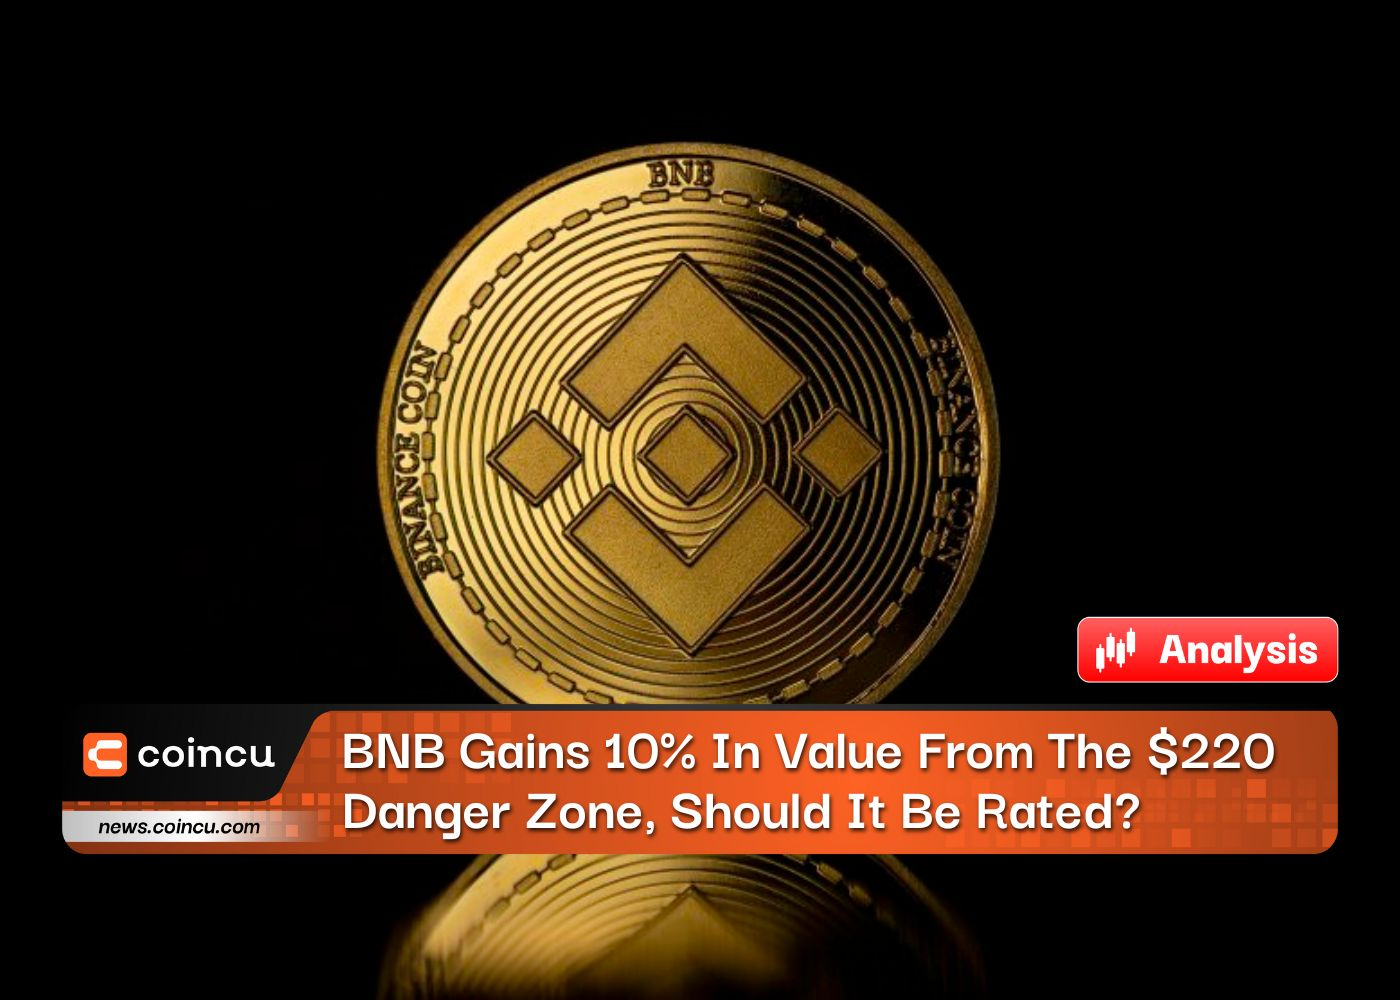 BNB Gains 10% In Value From The $220 Danger Zone, Should It Be Rated?